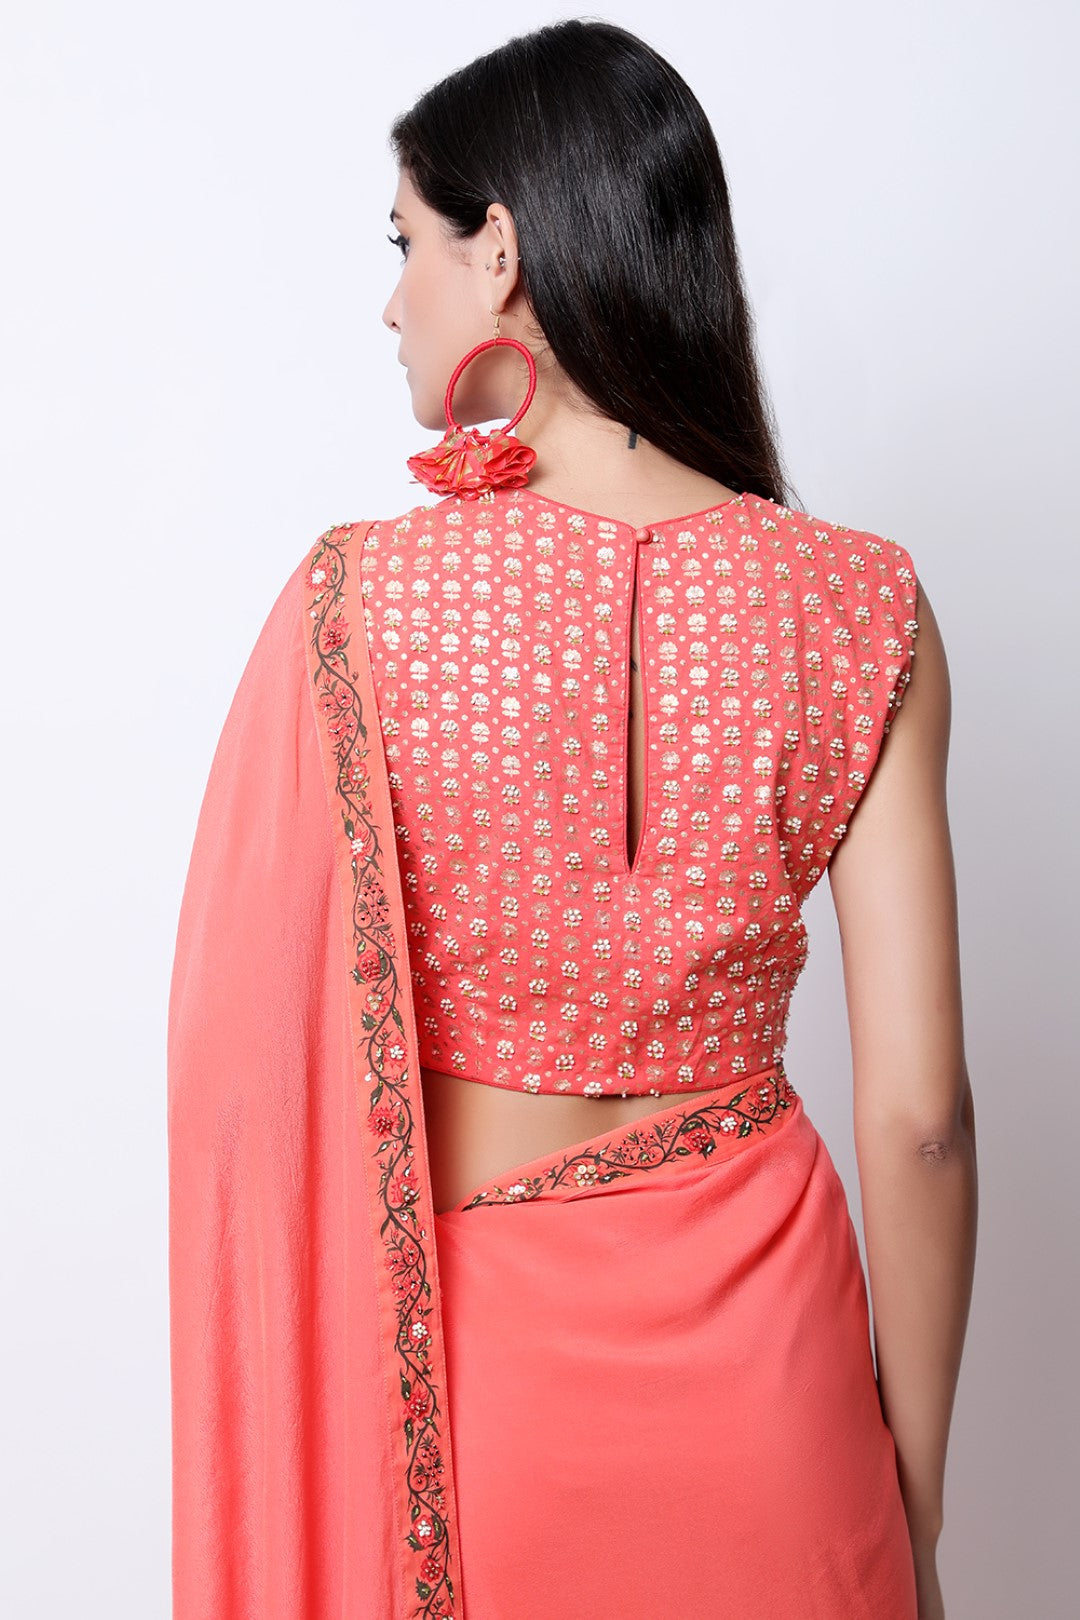 Gajari Coral frill saree with bel detail , paired with chotu sanga gold printed hand-embroidered blouse.